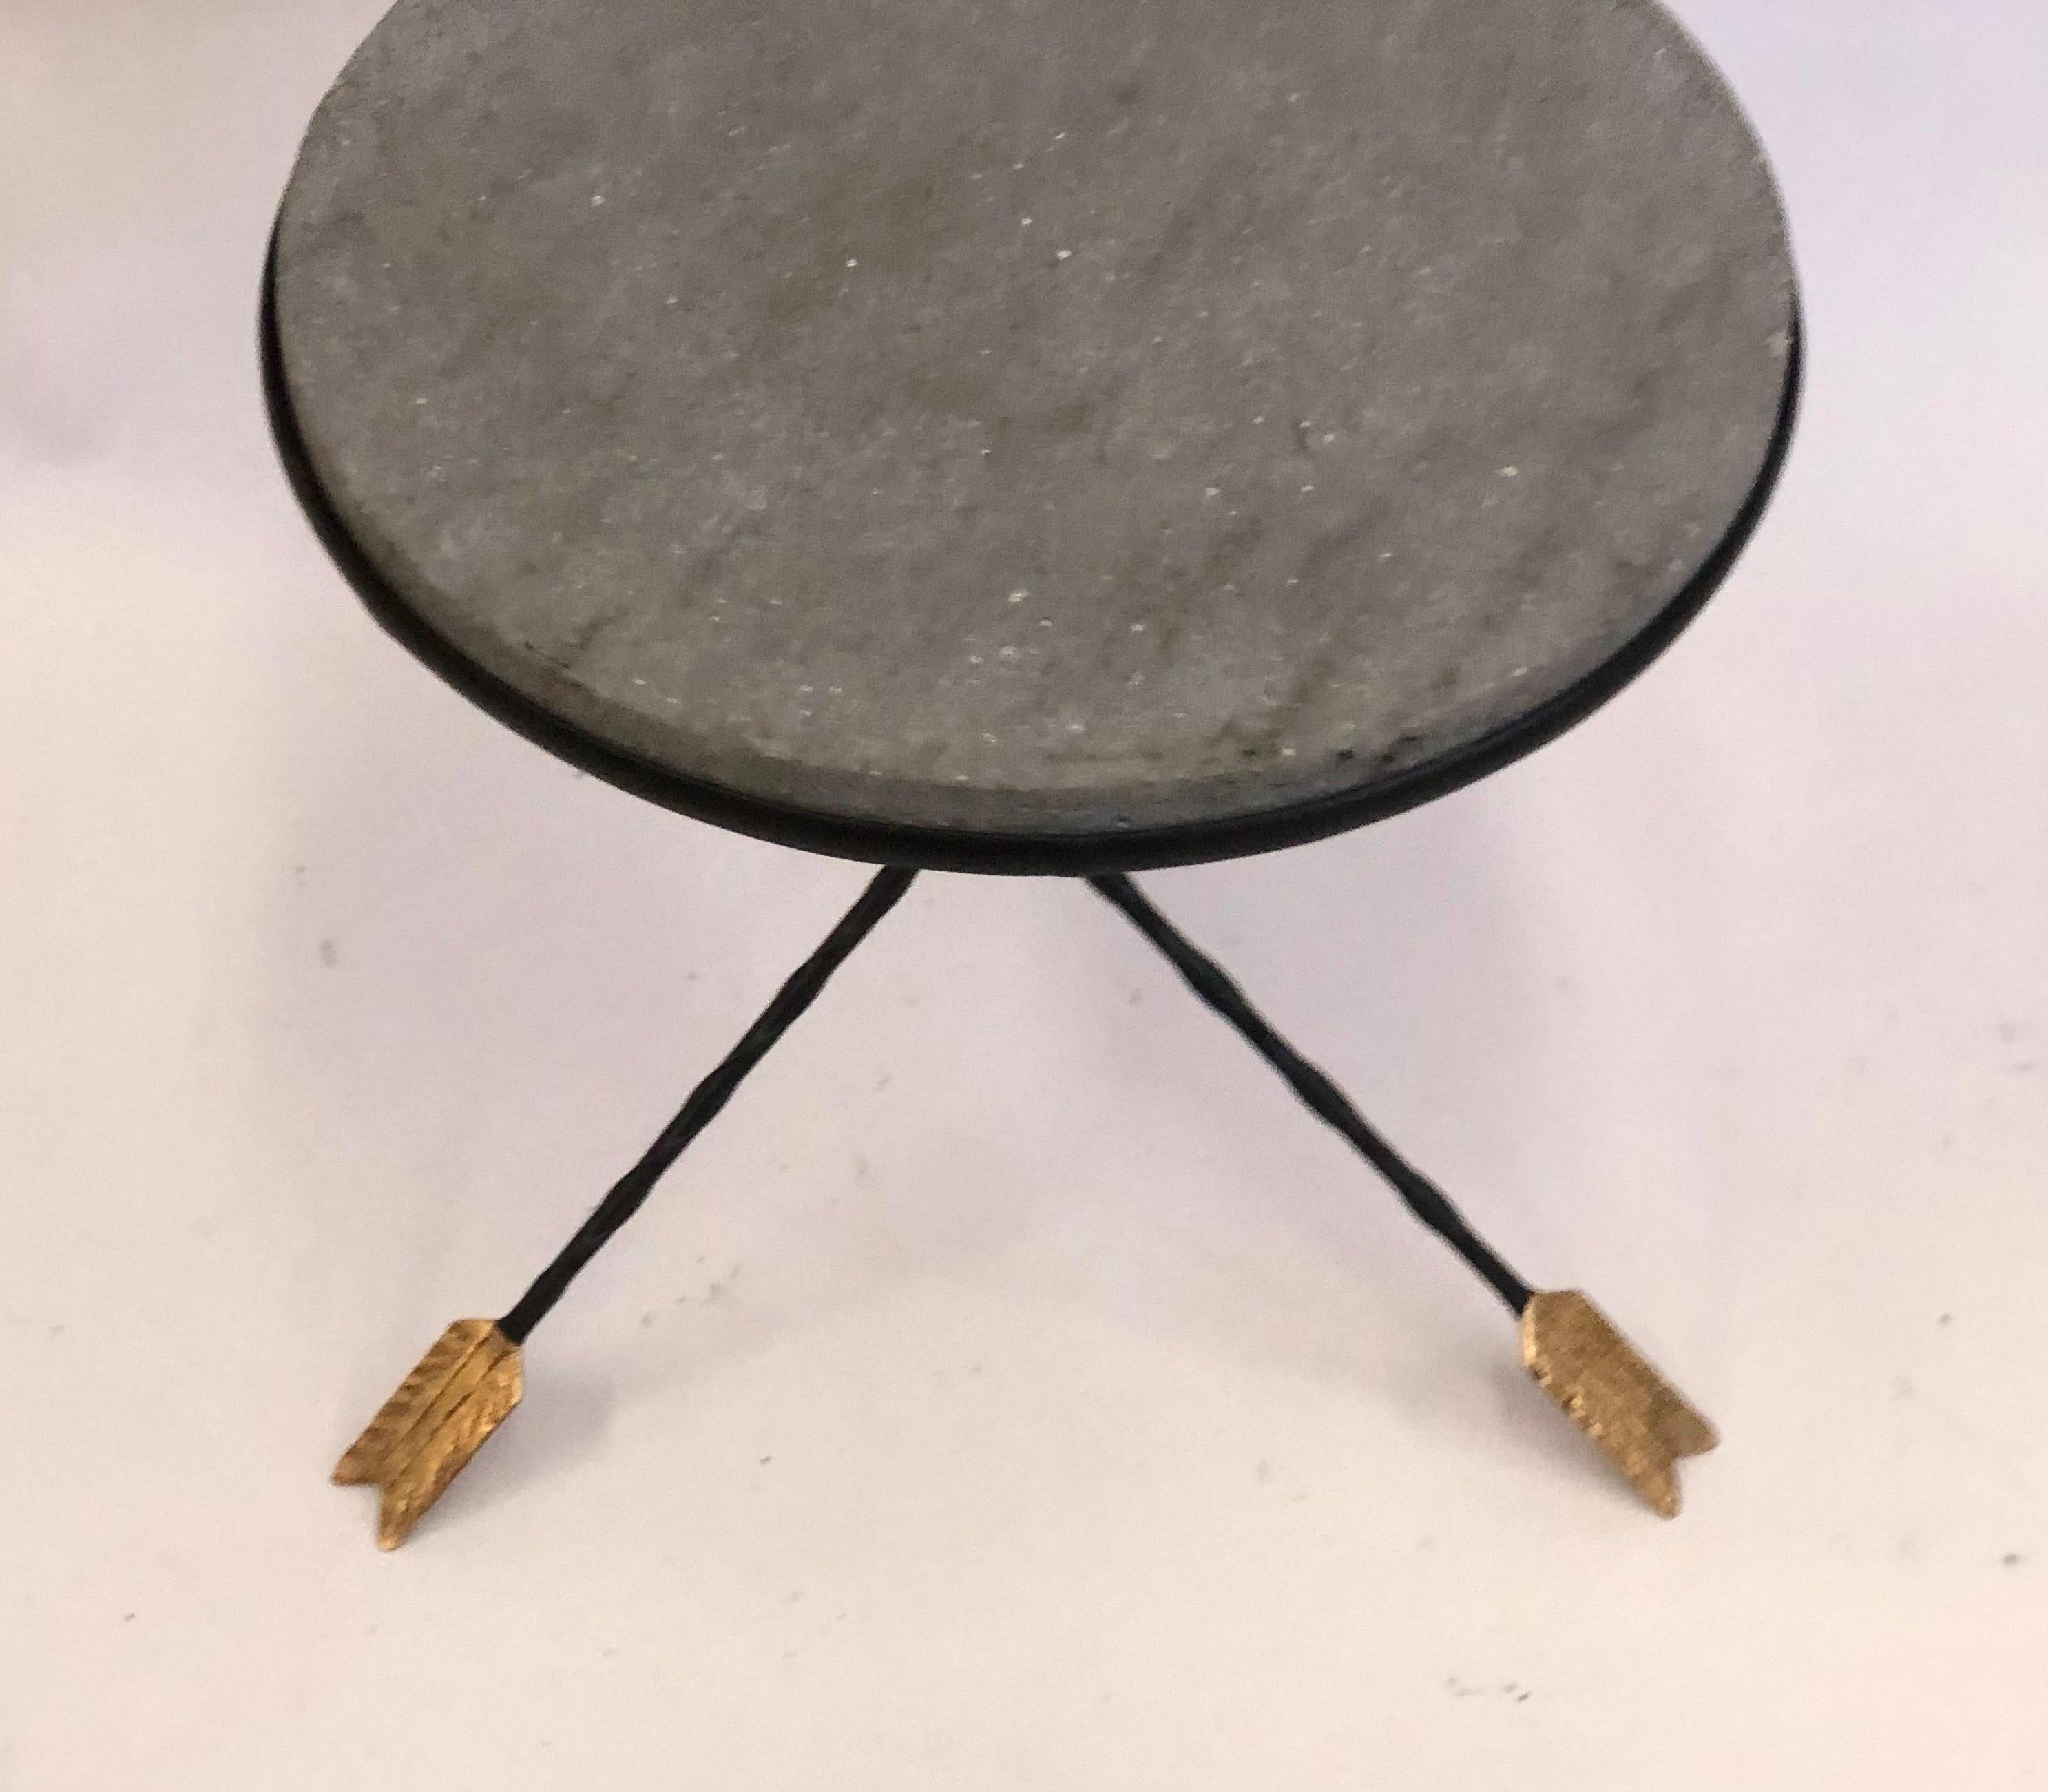 French Modern Neoclassical Gilt Iron & Basalt Stone Side Table by Maison Jansen For Sale 1